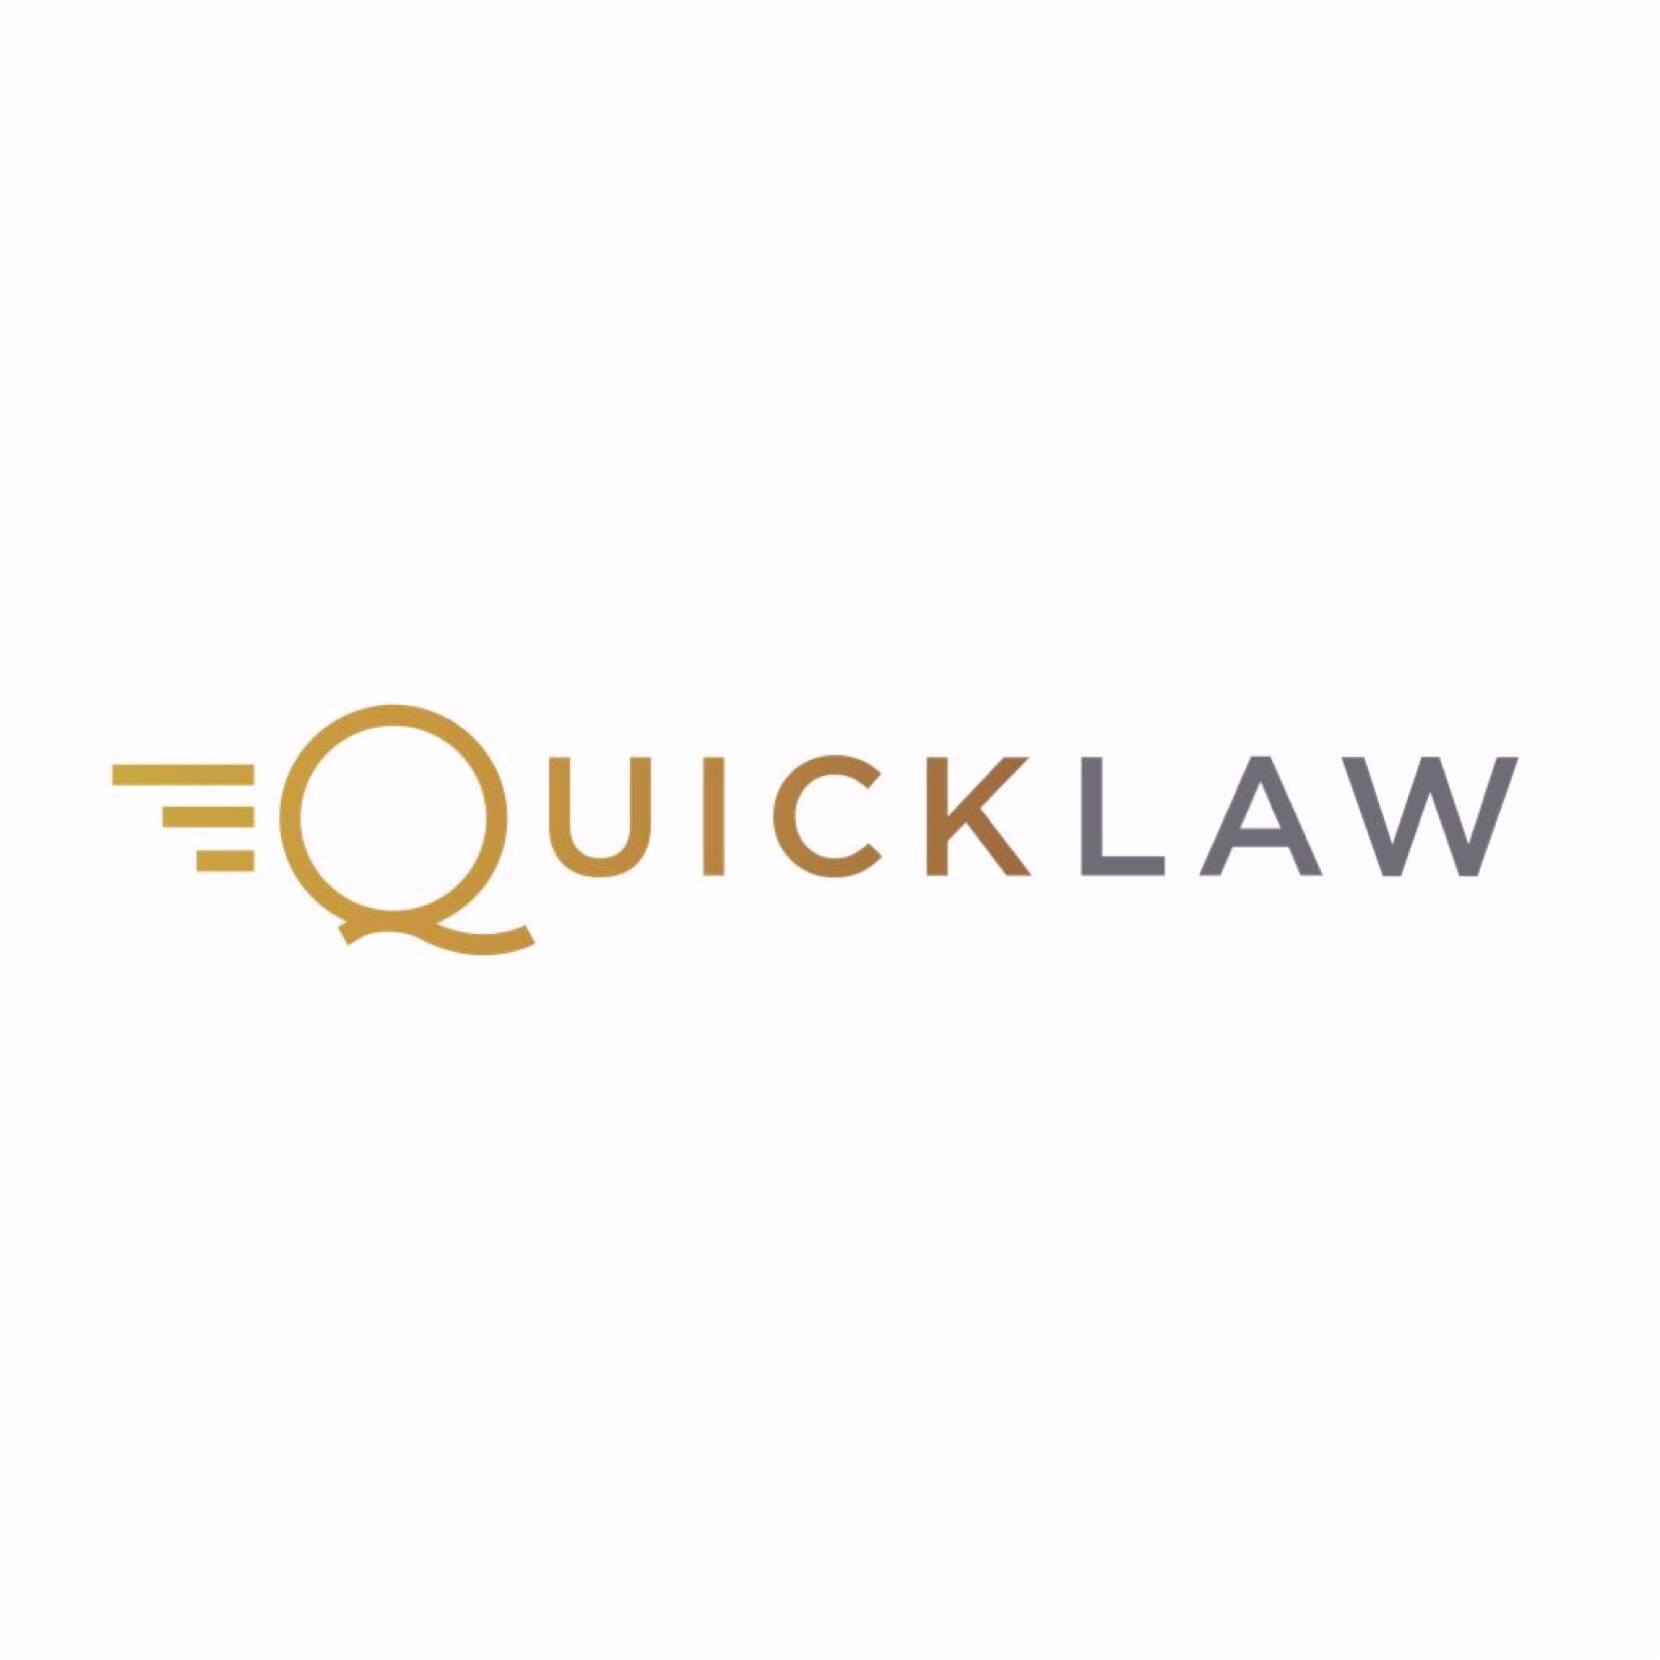 FOUNDERS STORY – THE BIRTH OF QUICKLAW